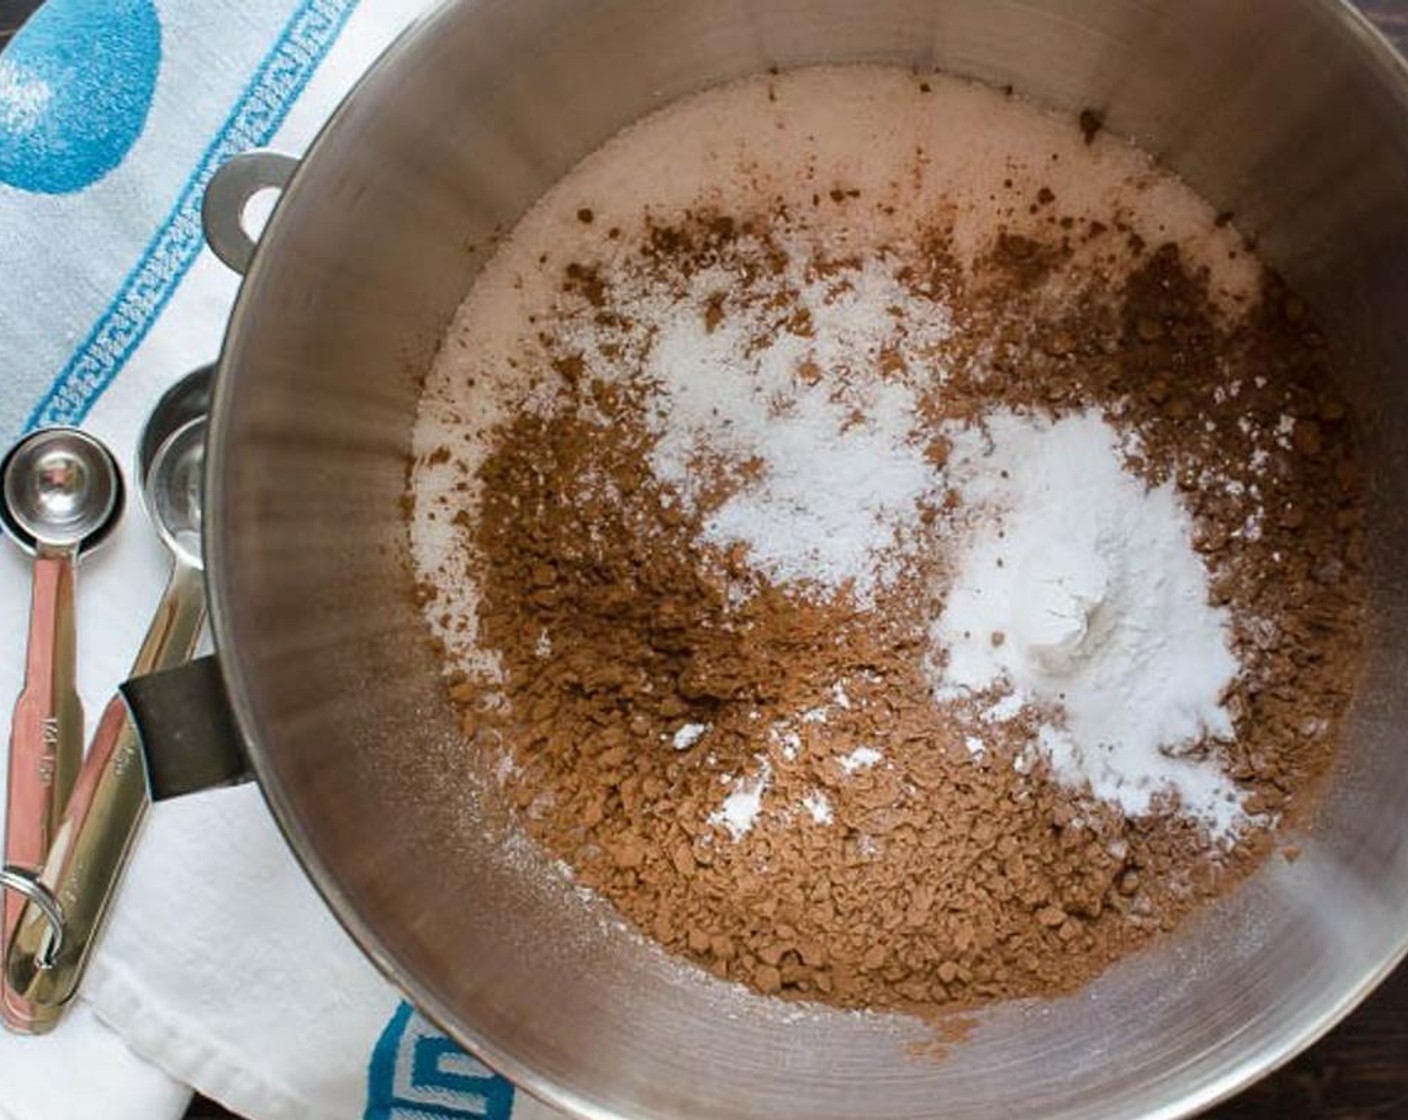 step 3 In a large bowl, combine the All-Purpose Flour (1 3/4 cups), Granulated Sugar (2 cups), Unsweetened Cocoa Powder (3/4 cup), Baking Soda (1/2 Tbsp), Baking Powder (1 tsp) and Kosher Salt (1 tsp). Whisk together until well combined.